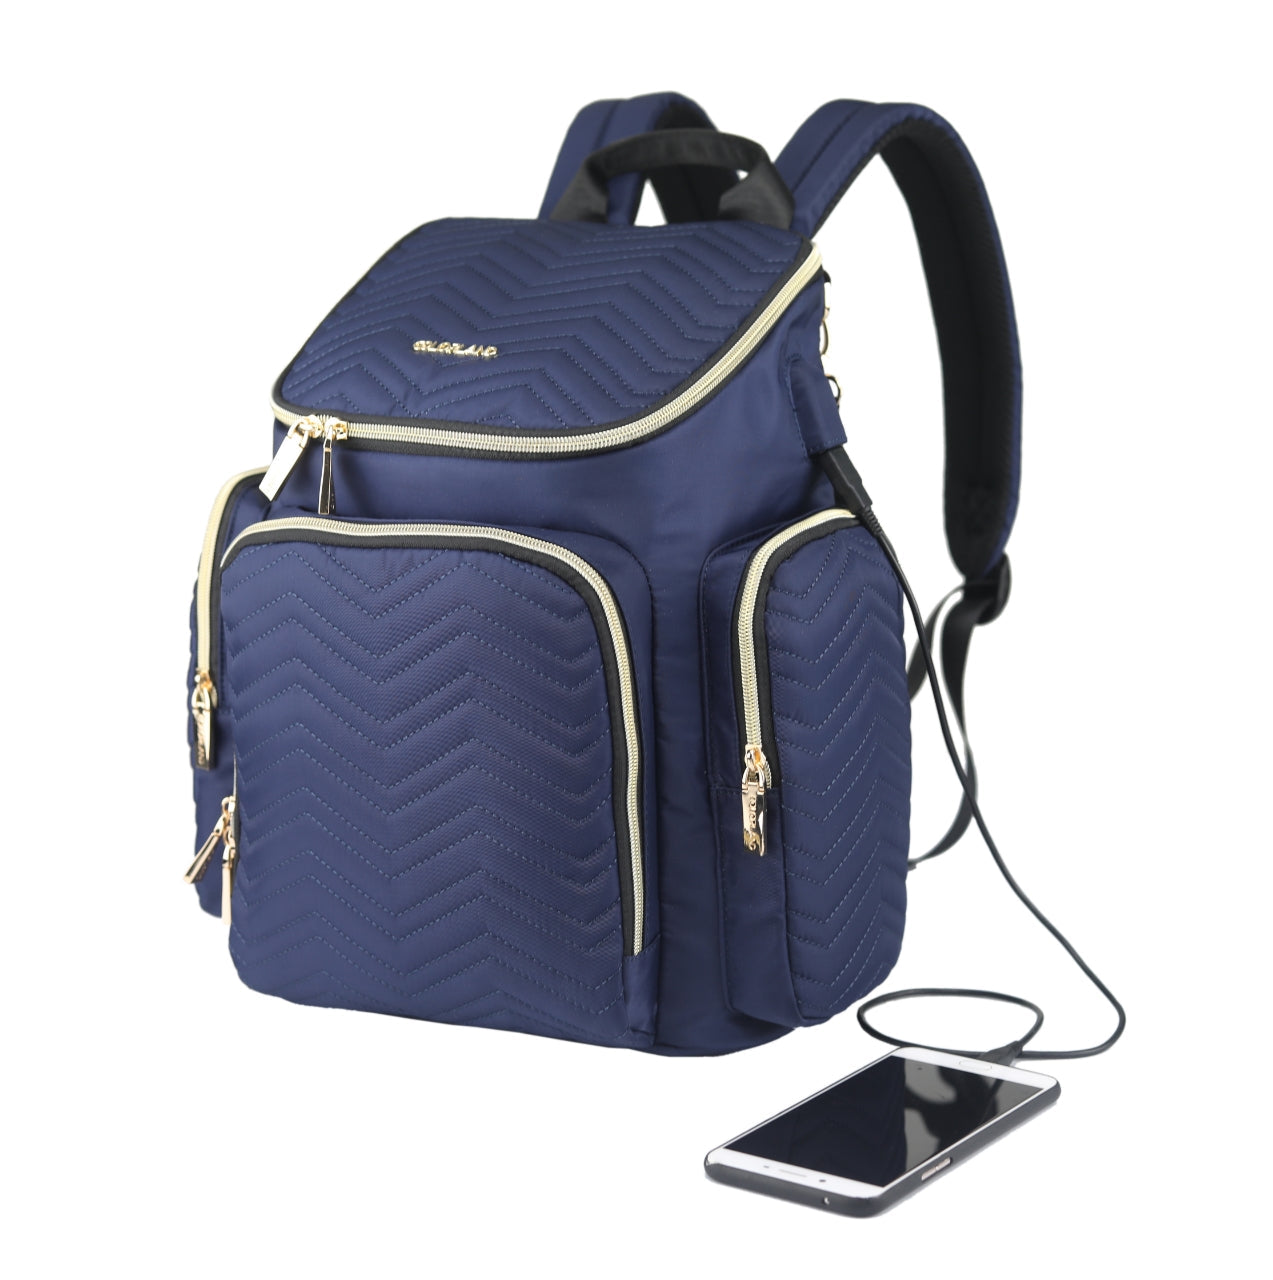 Backpack Nappy Bag Navy CLEARANCE